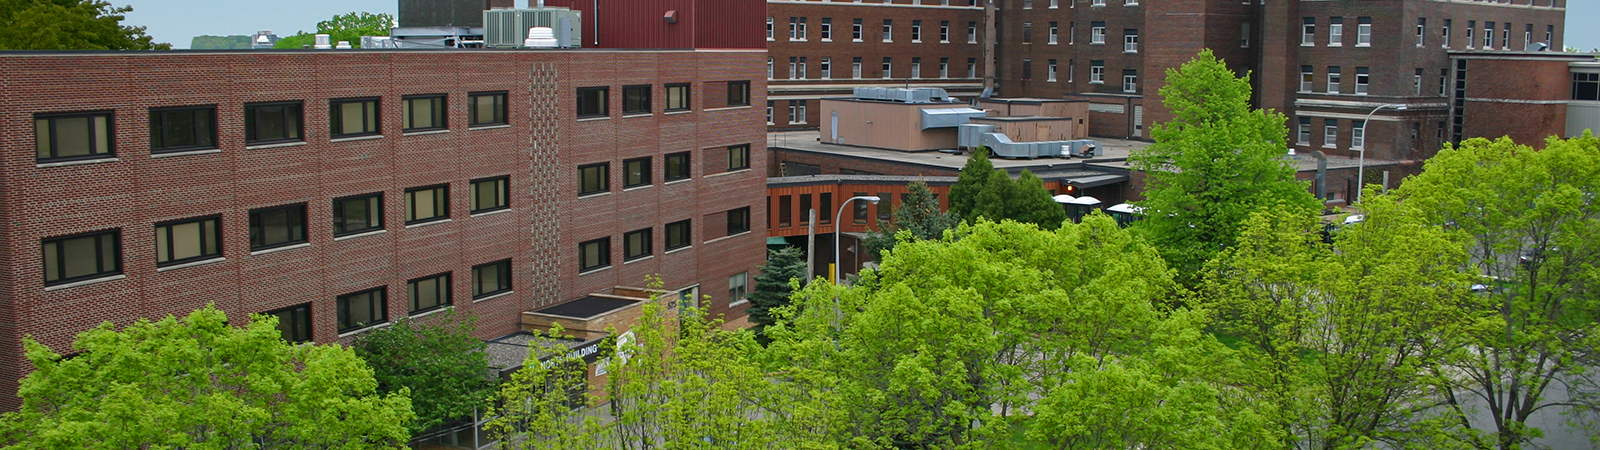 M Health Fairview University of Minnesota Medical Center - West Bank north